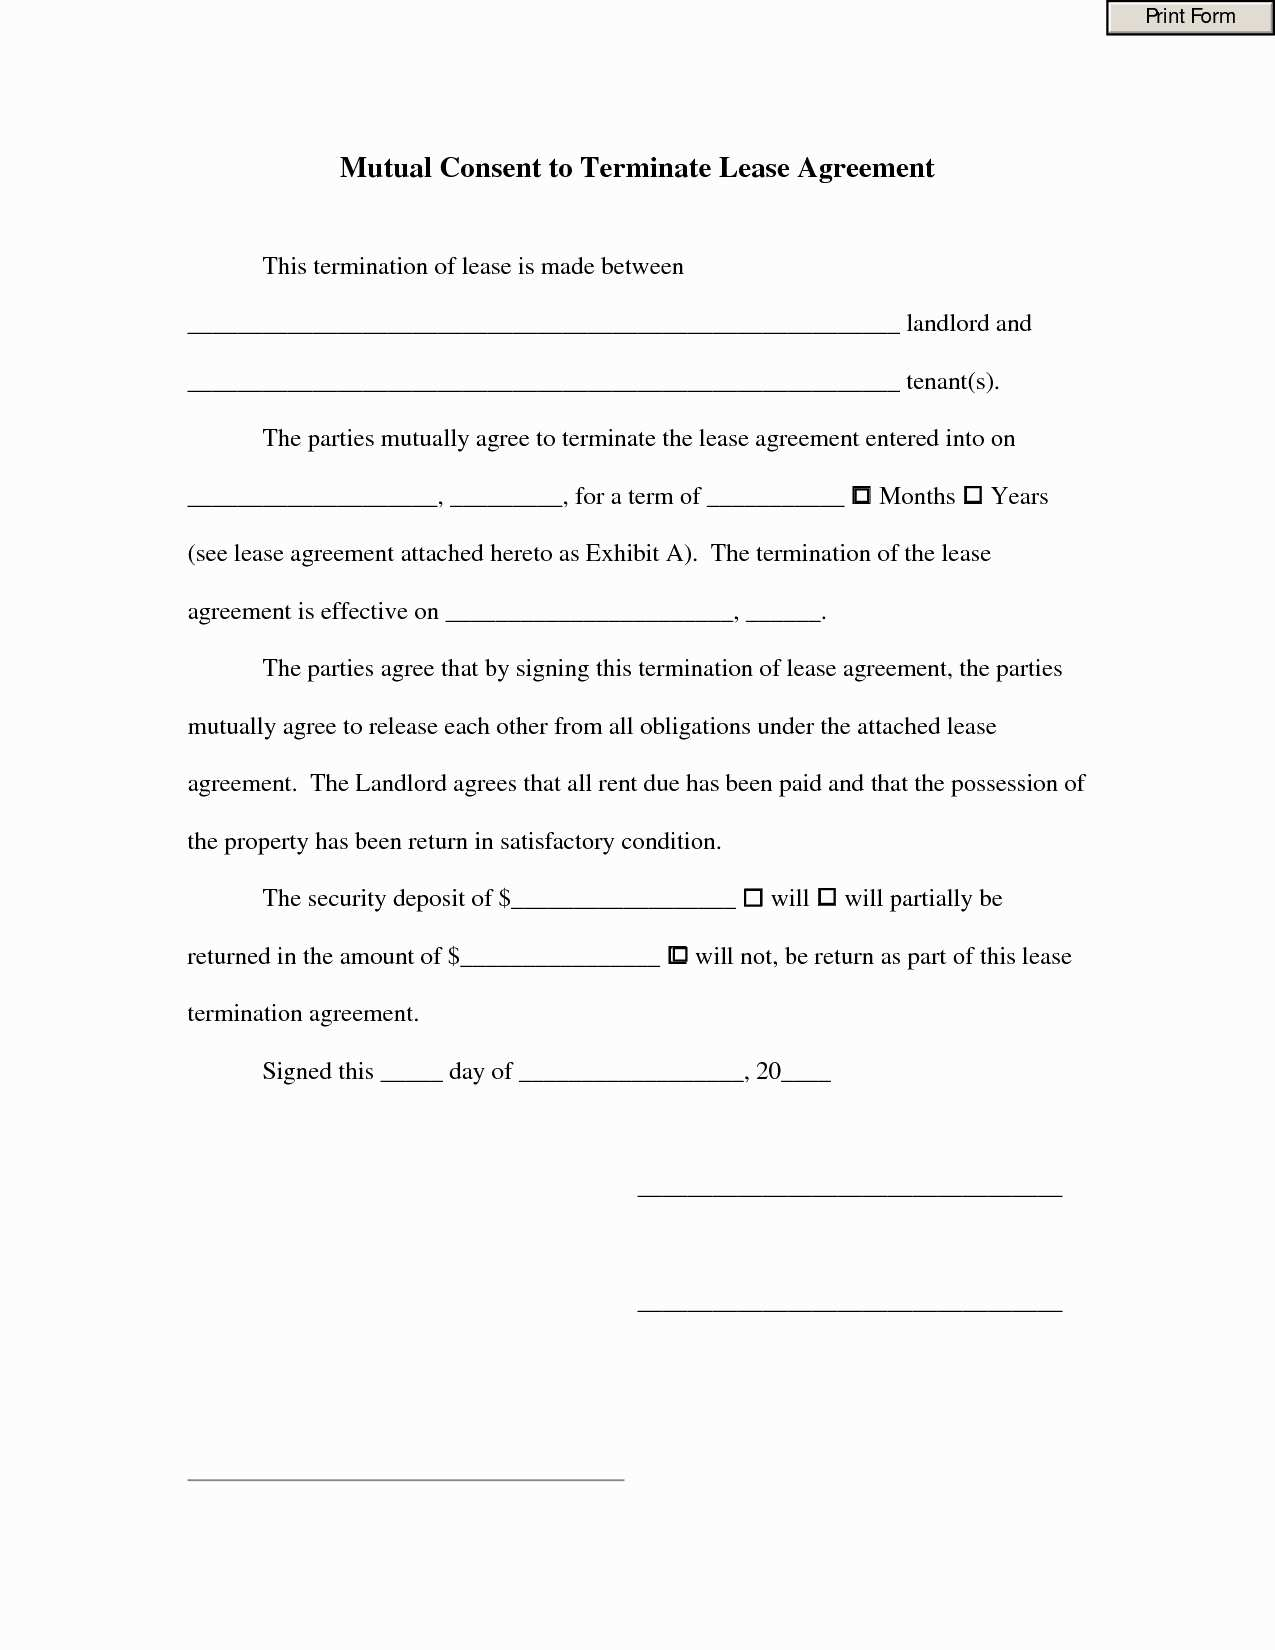 breaking lease agreement letter template Collection-Landlord Breach Lease Agreement Inspirational Letter Mutual Agreement Gallery Agreement Letter format 9-h